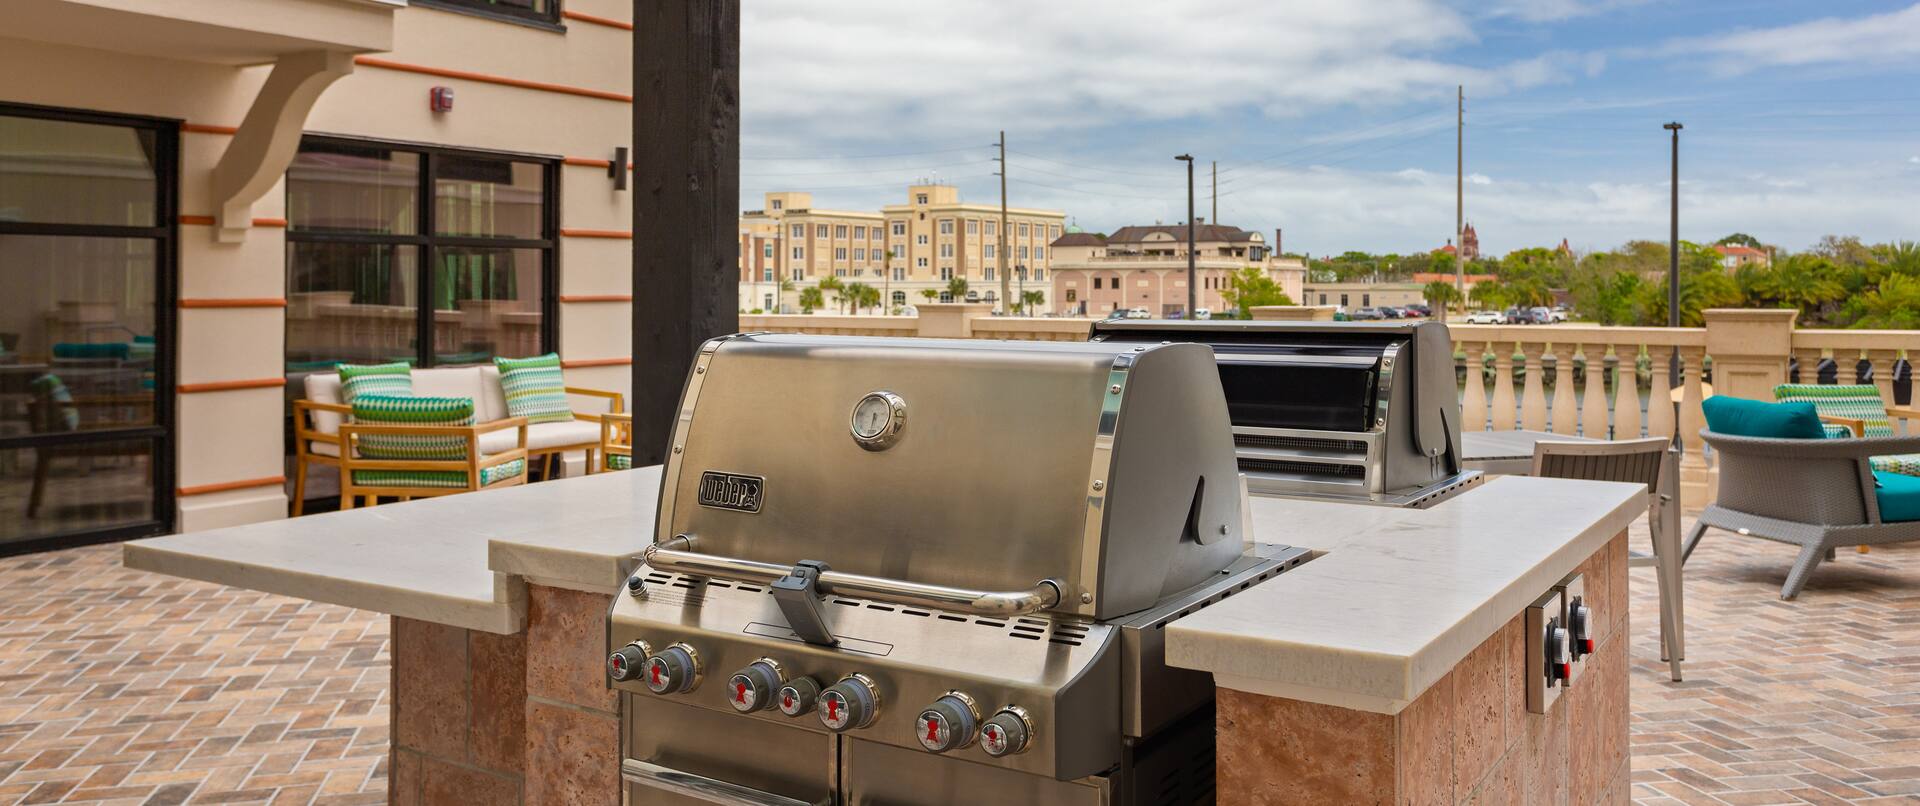 Gas grills available for your use